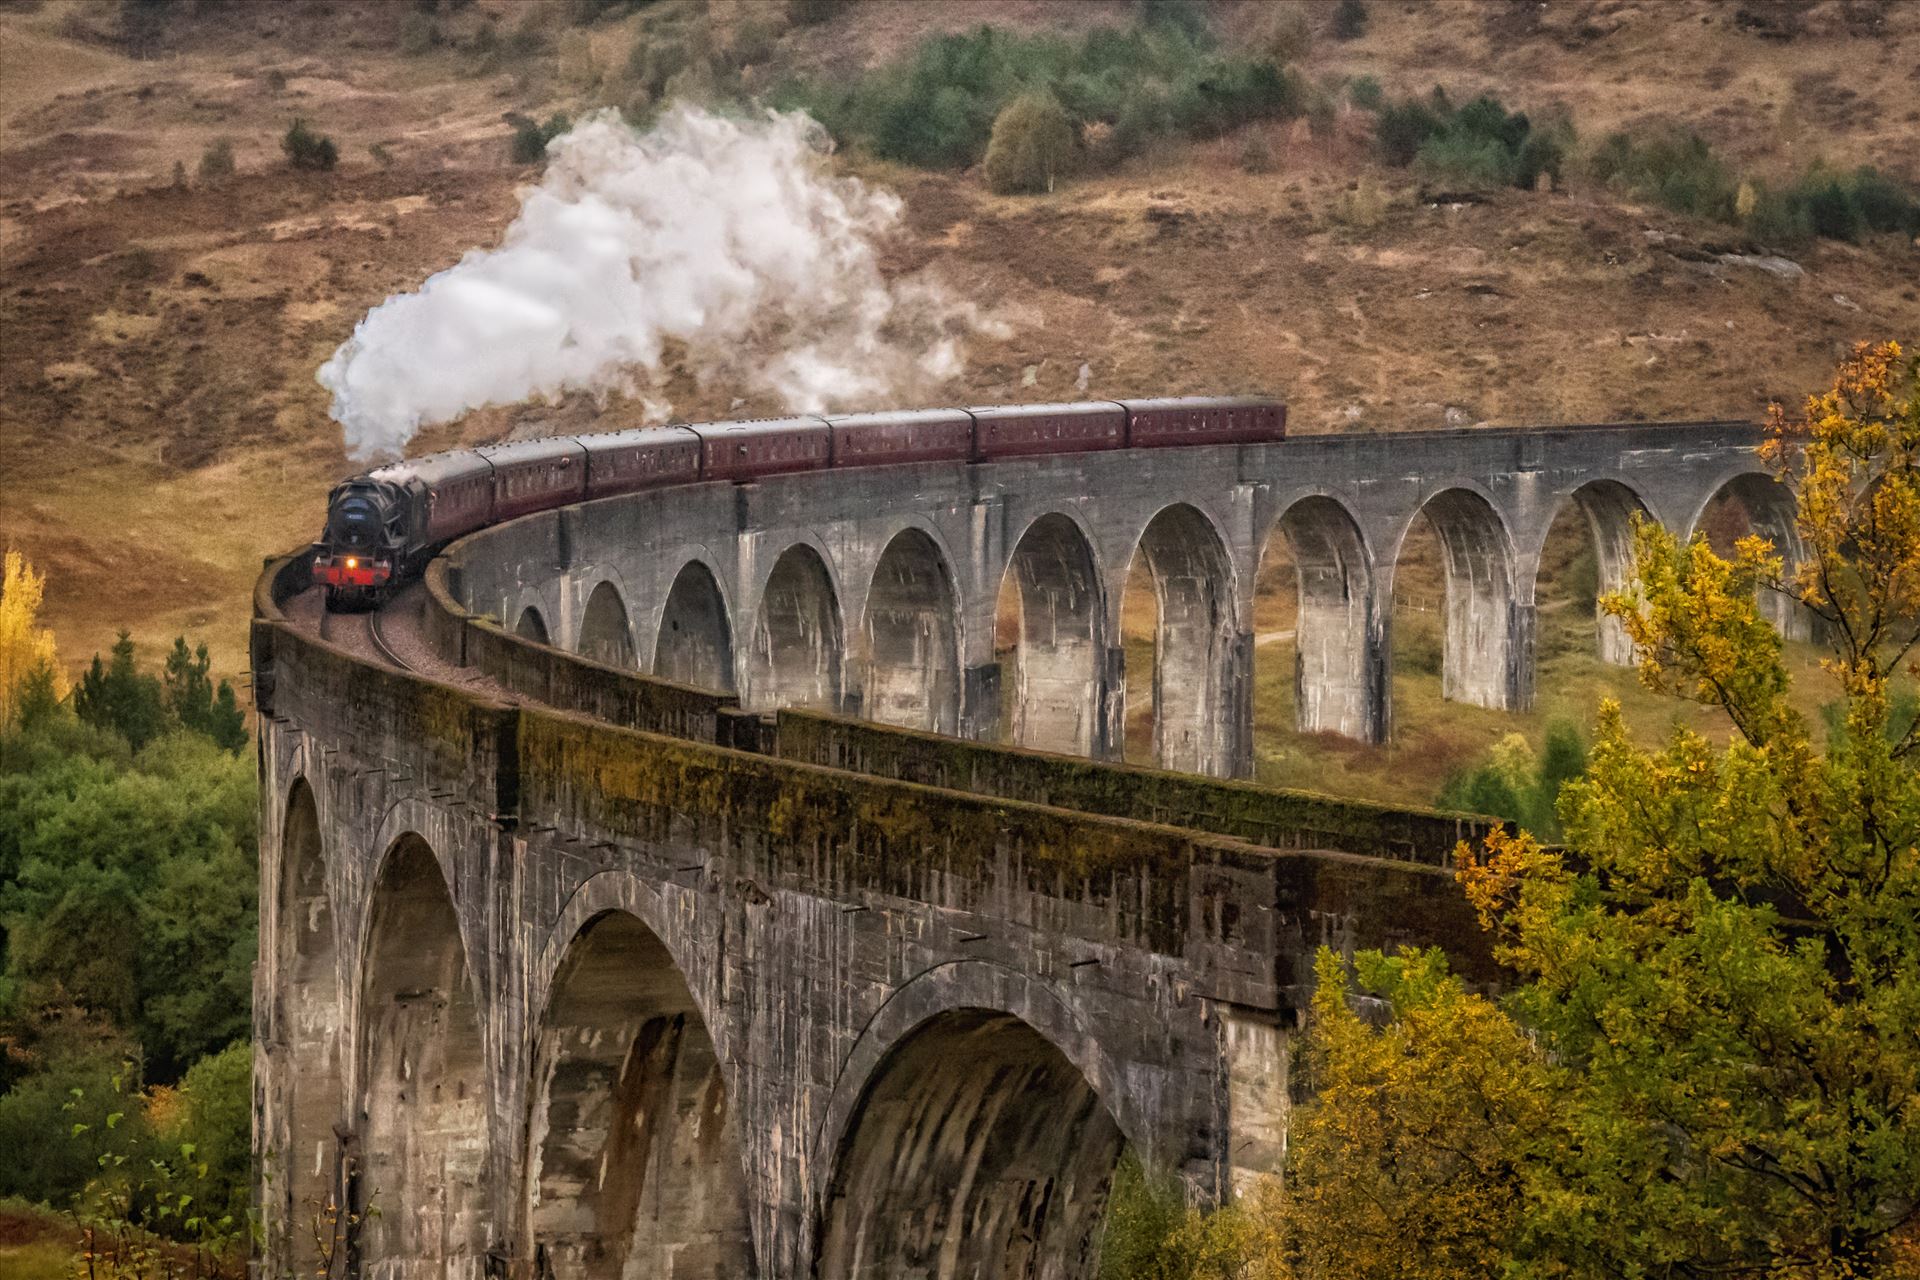 The Glenfinnan Viaduct (2) The Glenfinnan viaduct is a railway viaduct on the West Highland line which connects Fort William and Malaig. The viaduct has been the location for many films and tv series but probably most famous for the Harry Potter films. by philreay